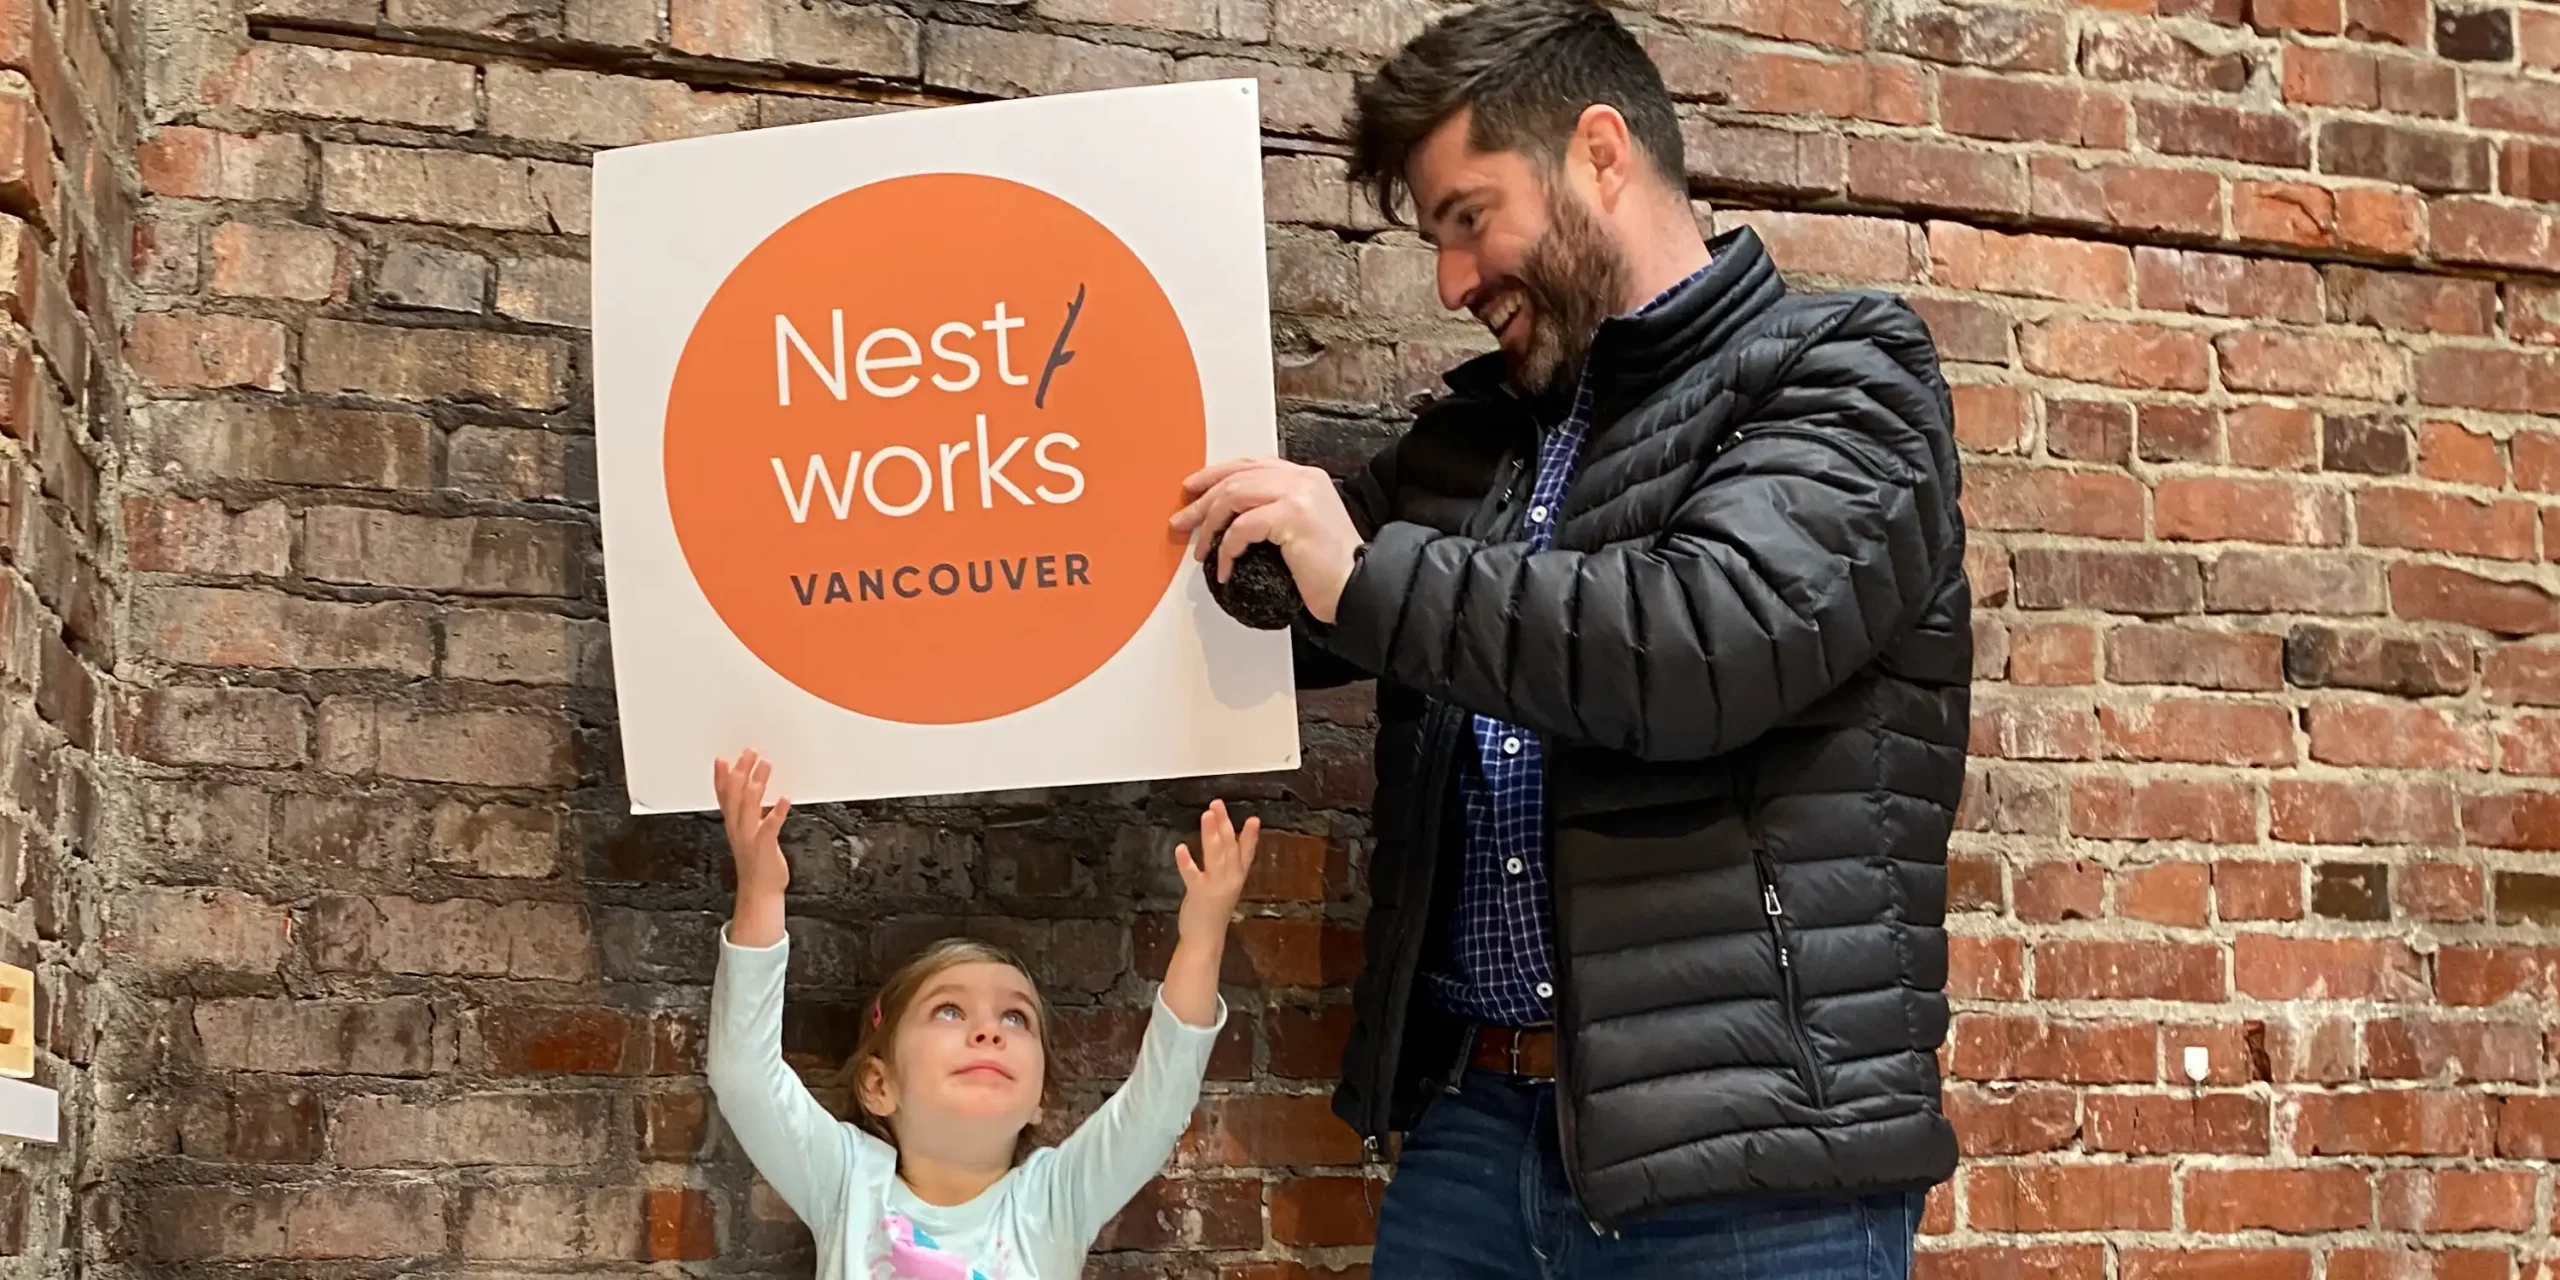 Dad and daughter holding NestWorks sign against interior brick wall